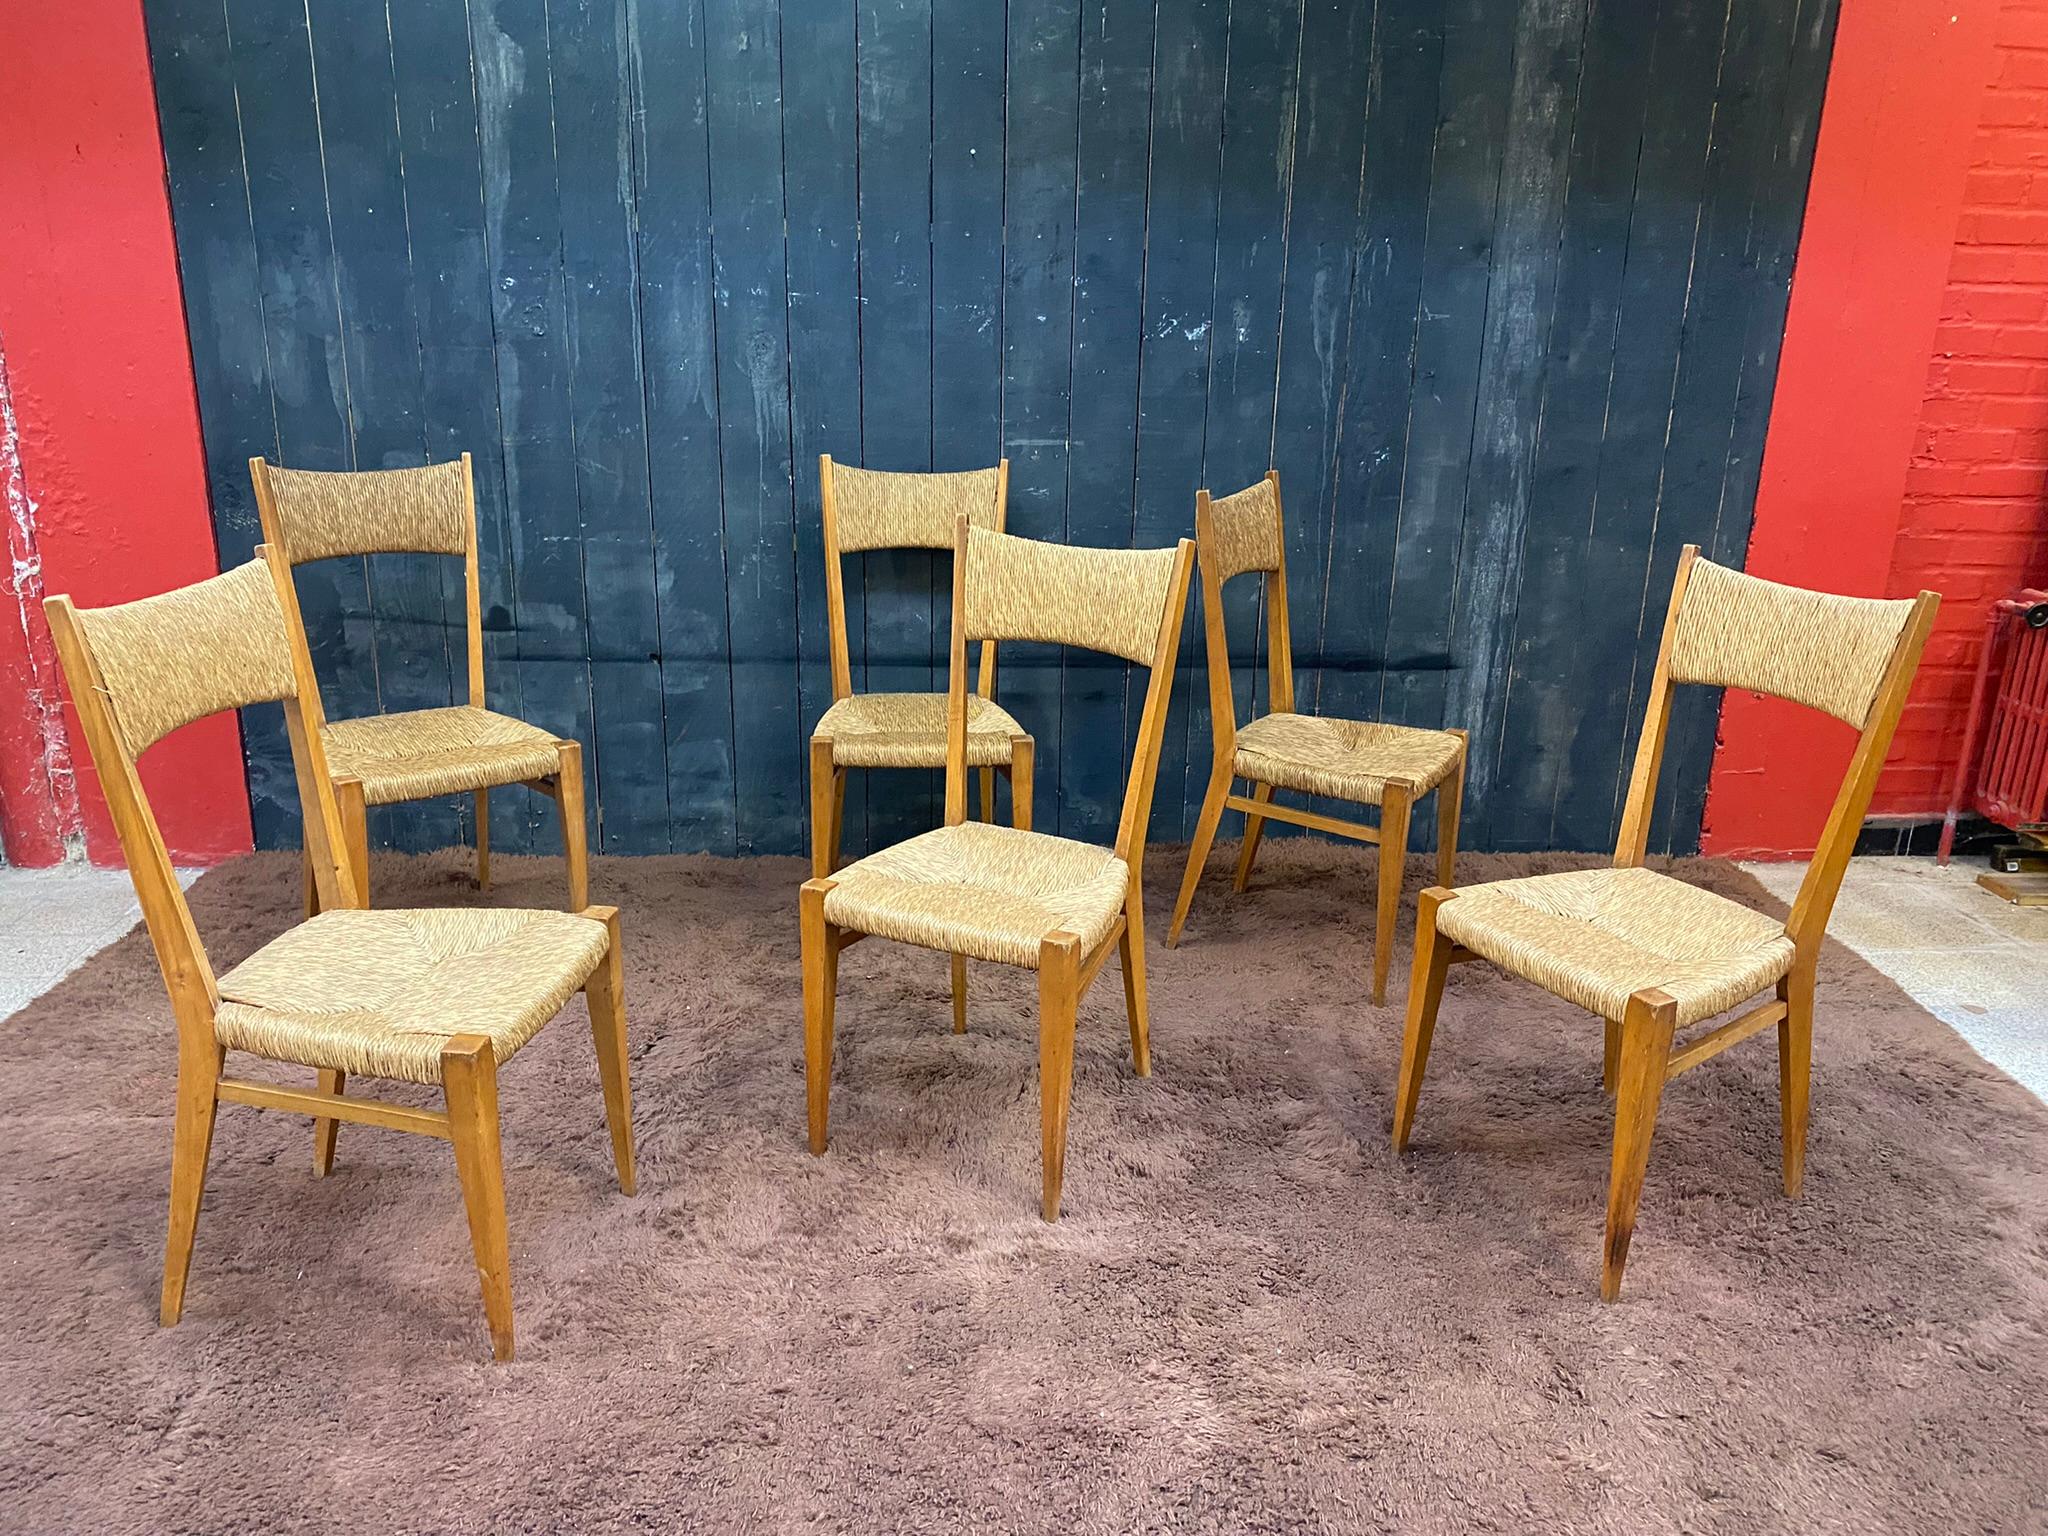 Mid-20th Century Series of 6 Elegant Oak Chairs, French Reconstruction Period, circa 1950 For Sale